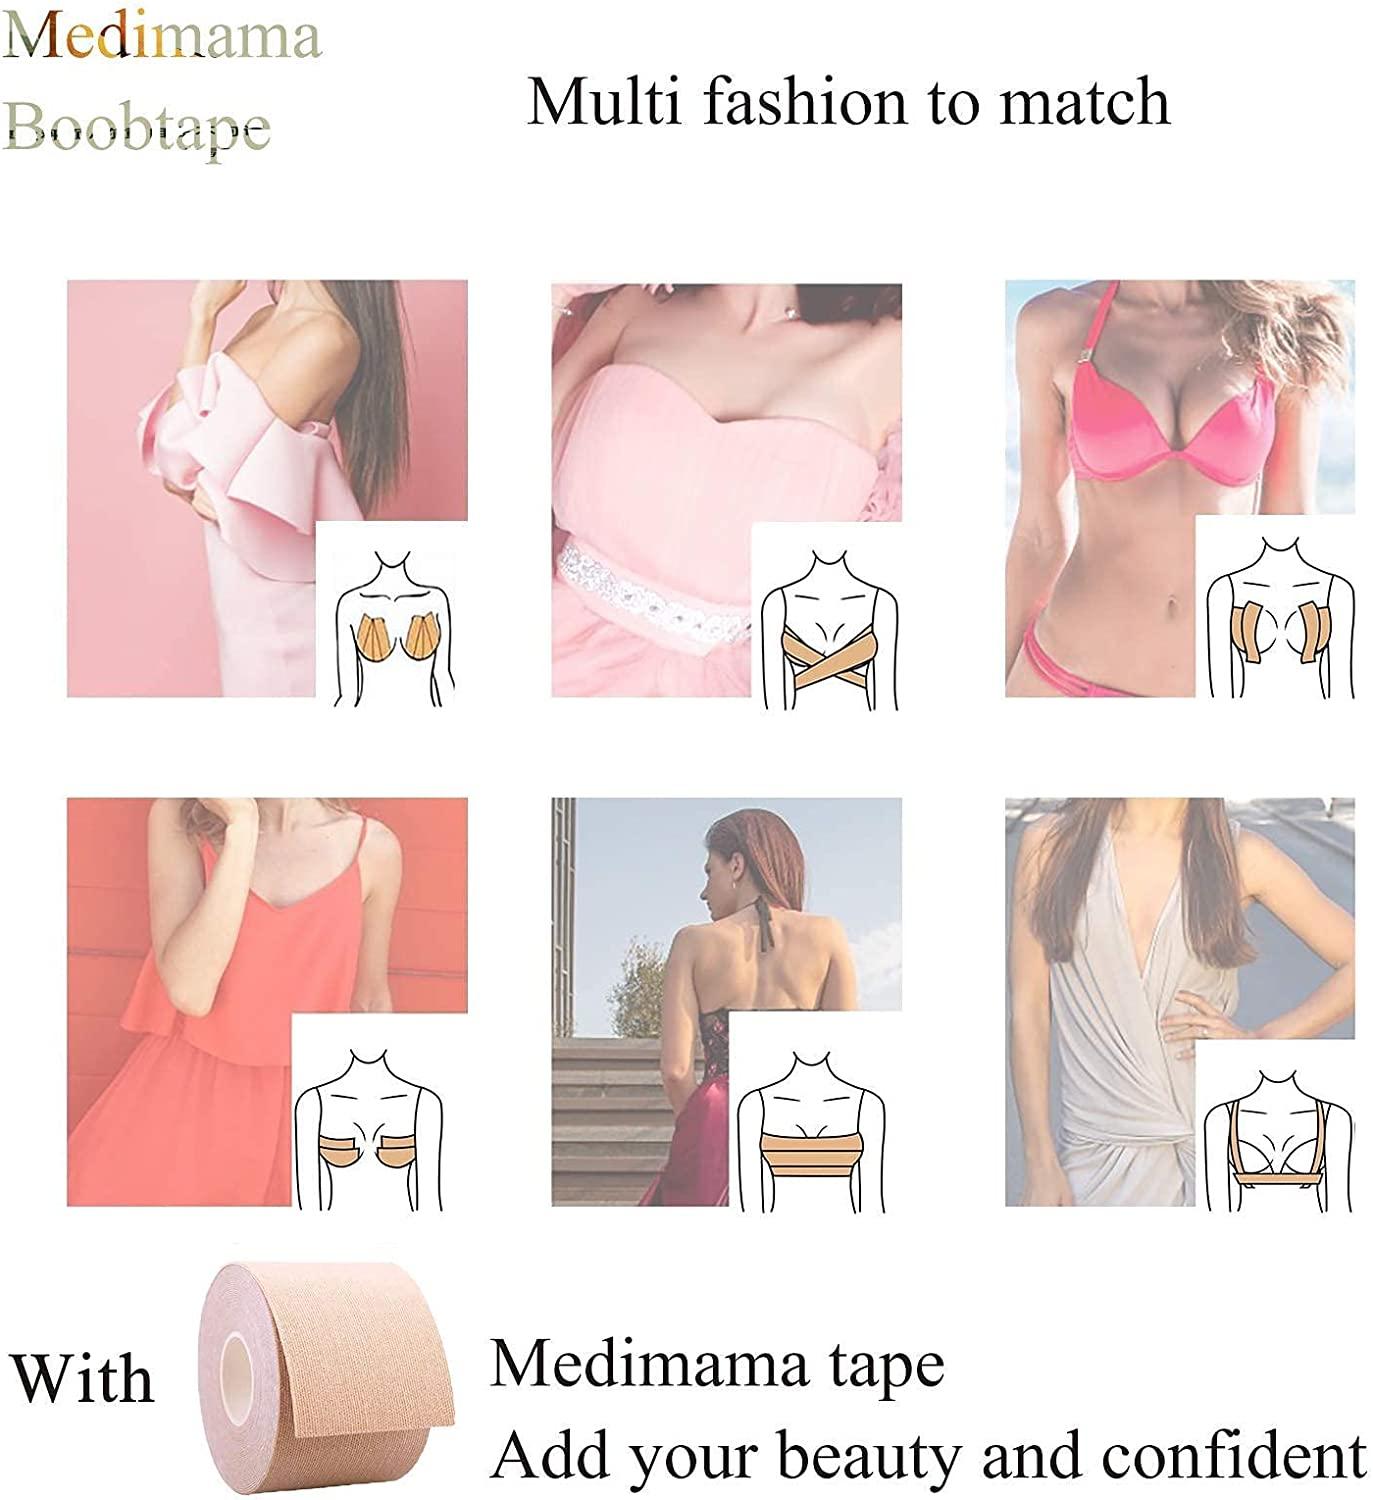 How to use boob tape?